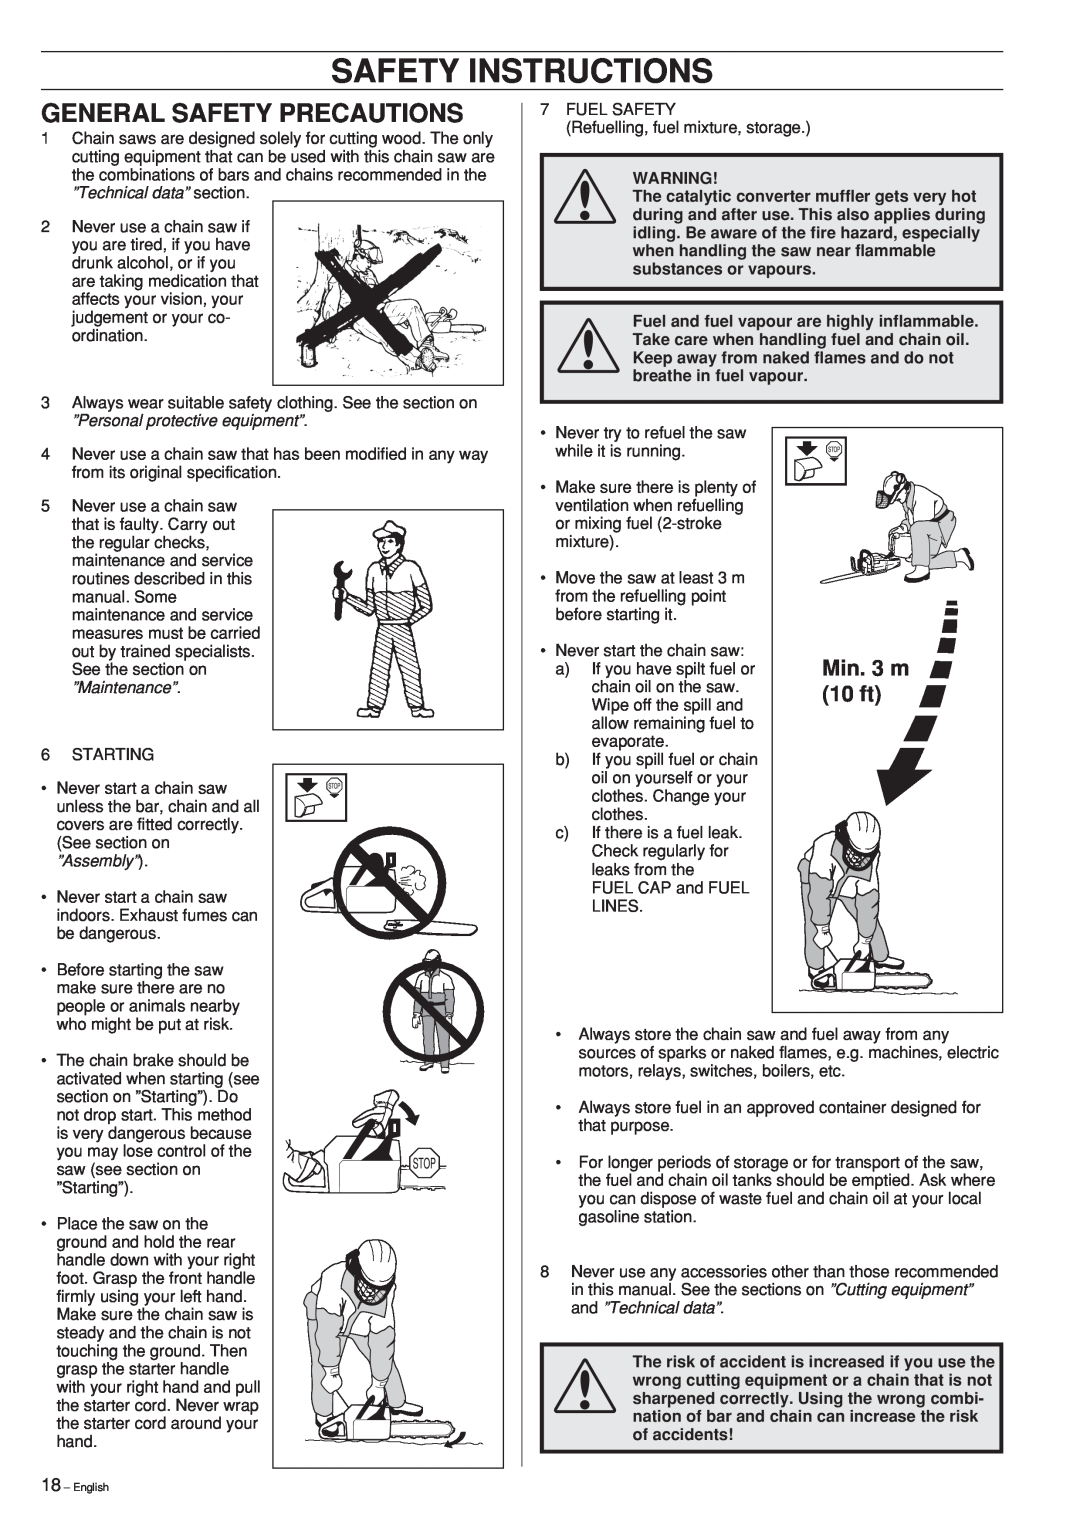 Jonsered 2141, 2145, 2150 manual General Safety Precautions, Min. 3 m, 10 ft, Safety Instructions 